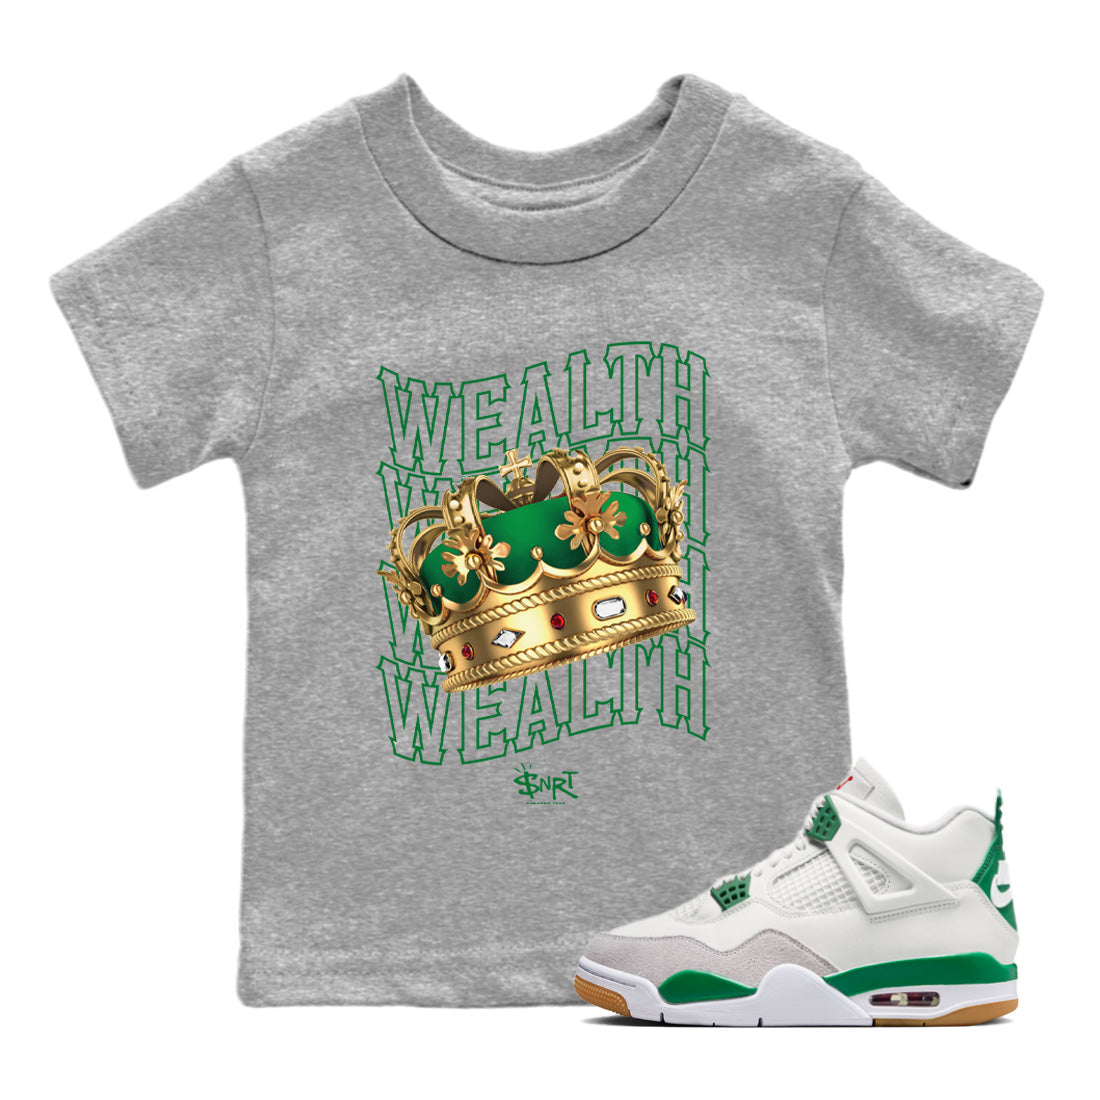 Air Jordan 4 Pine Green Wealth Baby and Kids Sneaker Tees Jordan Retro 4 Pine Green Kids Sneaker Tees Size Chart